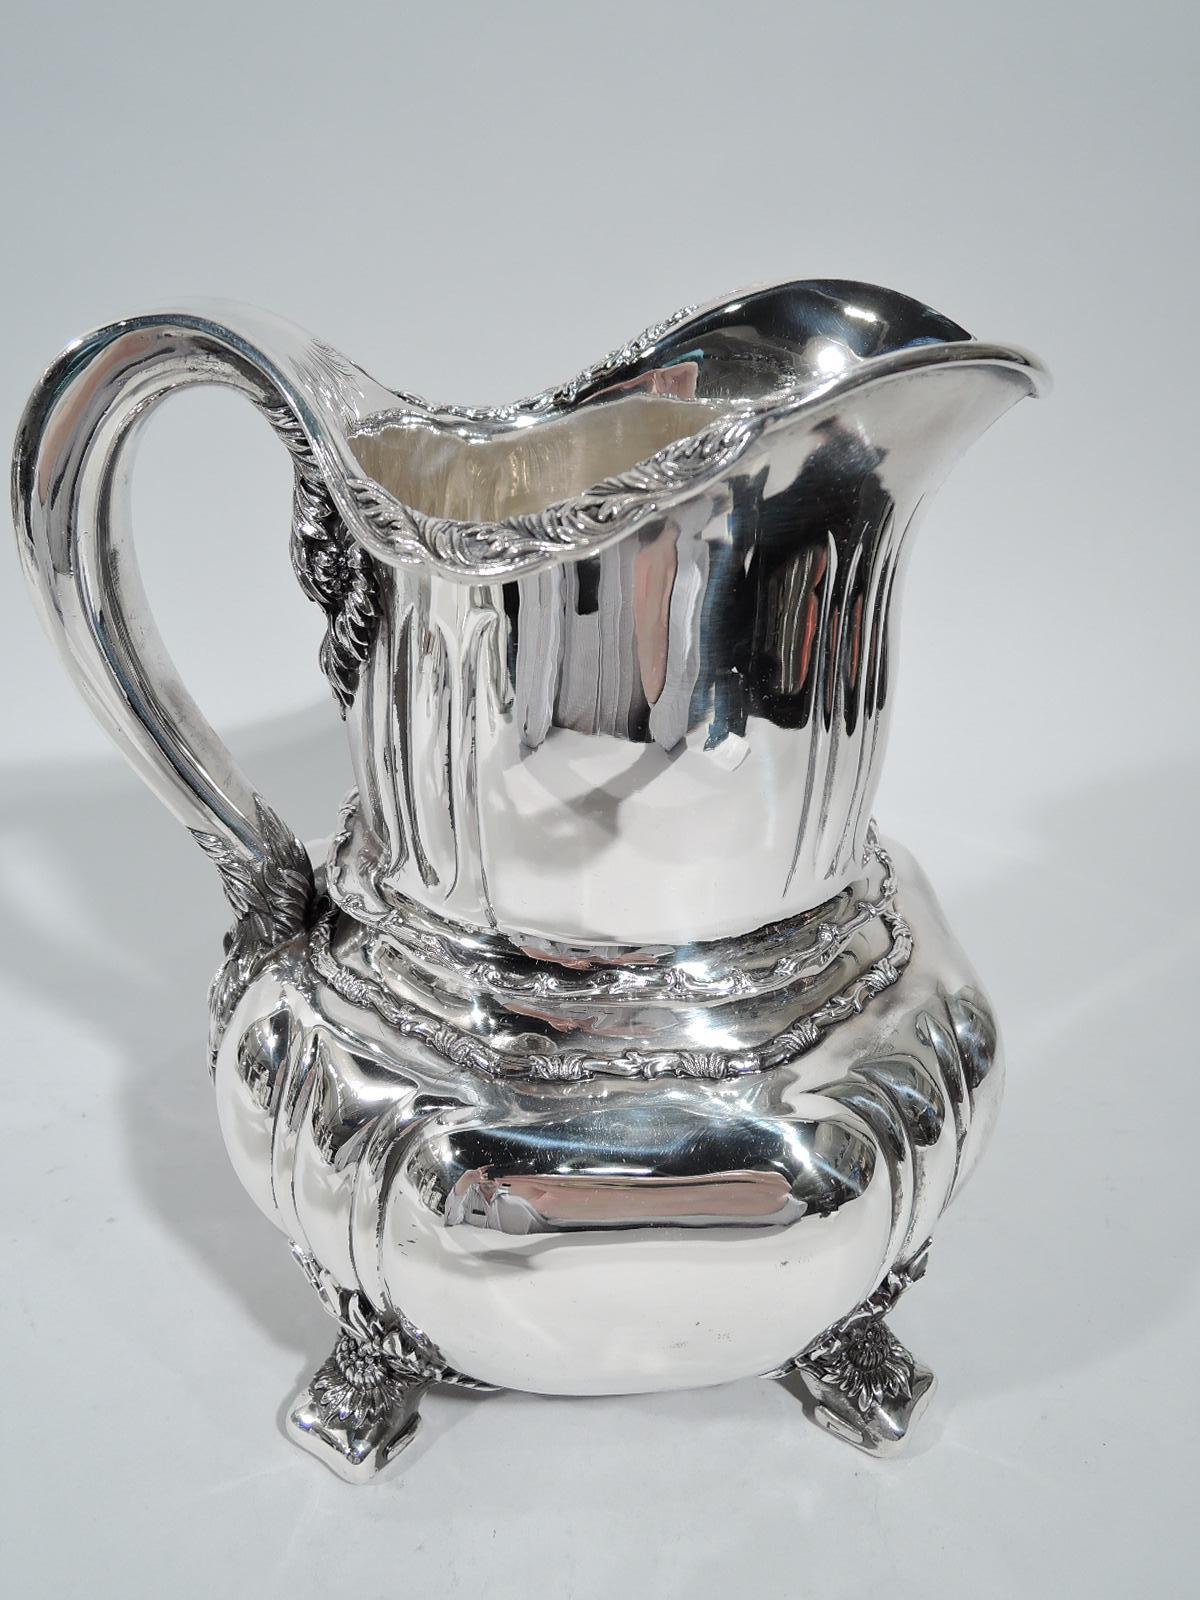 Chrysanthemum sterling silver water pitcher. Made by Tiffany & Co. in New York, ca 1910. Shaped bowl and curved neck with incised “slashes”. Helmet mouth and scroll handle. Rests on 4 flat volutes. Heavy and substantial with flower-head mounts on